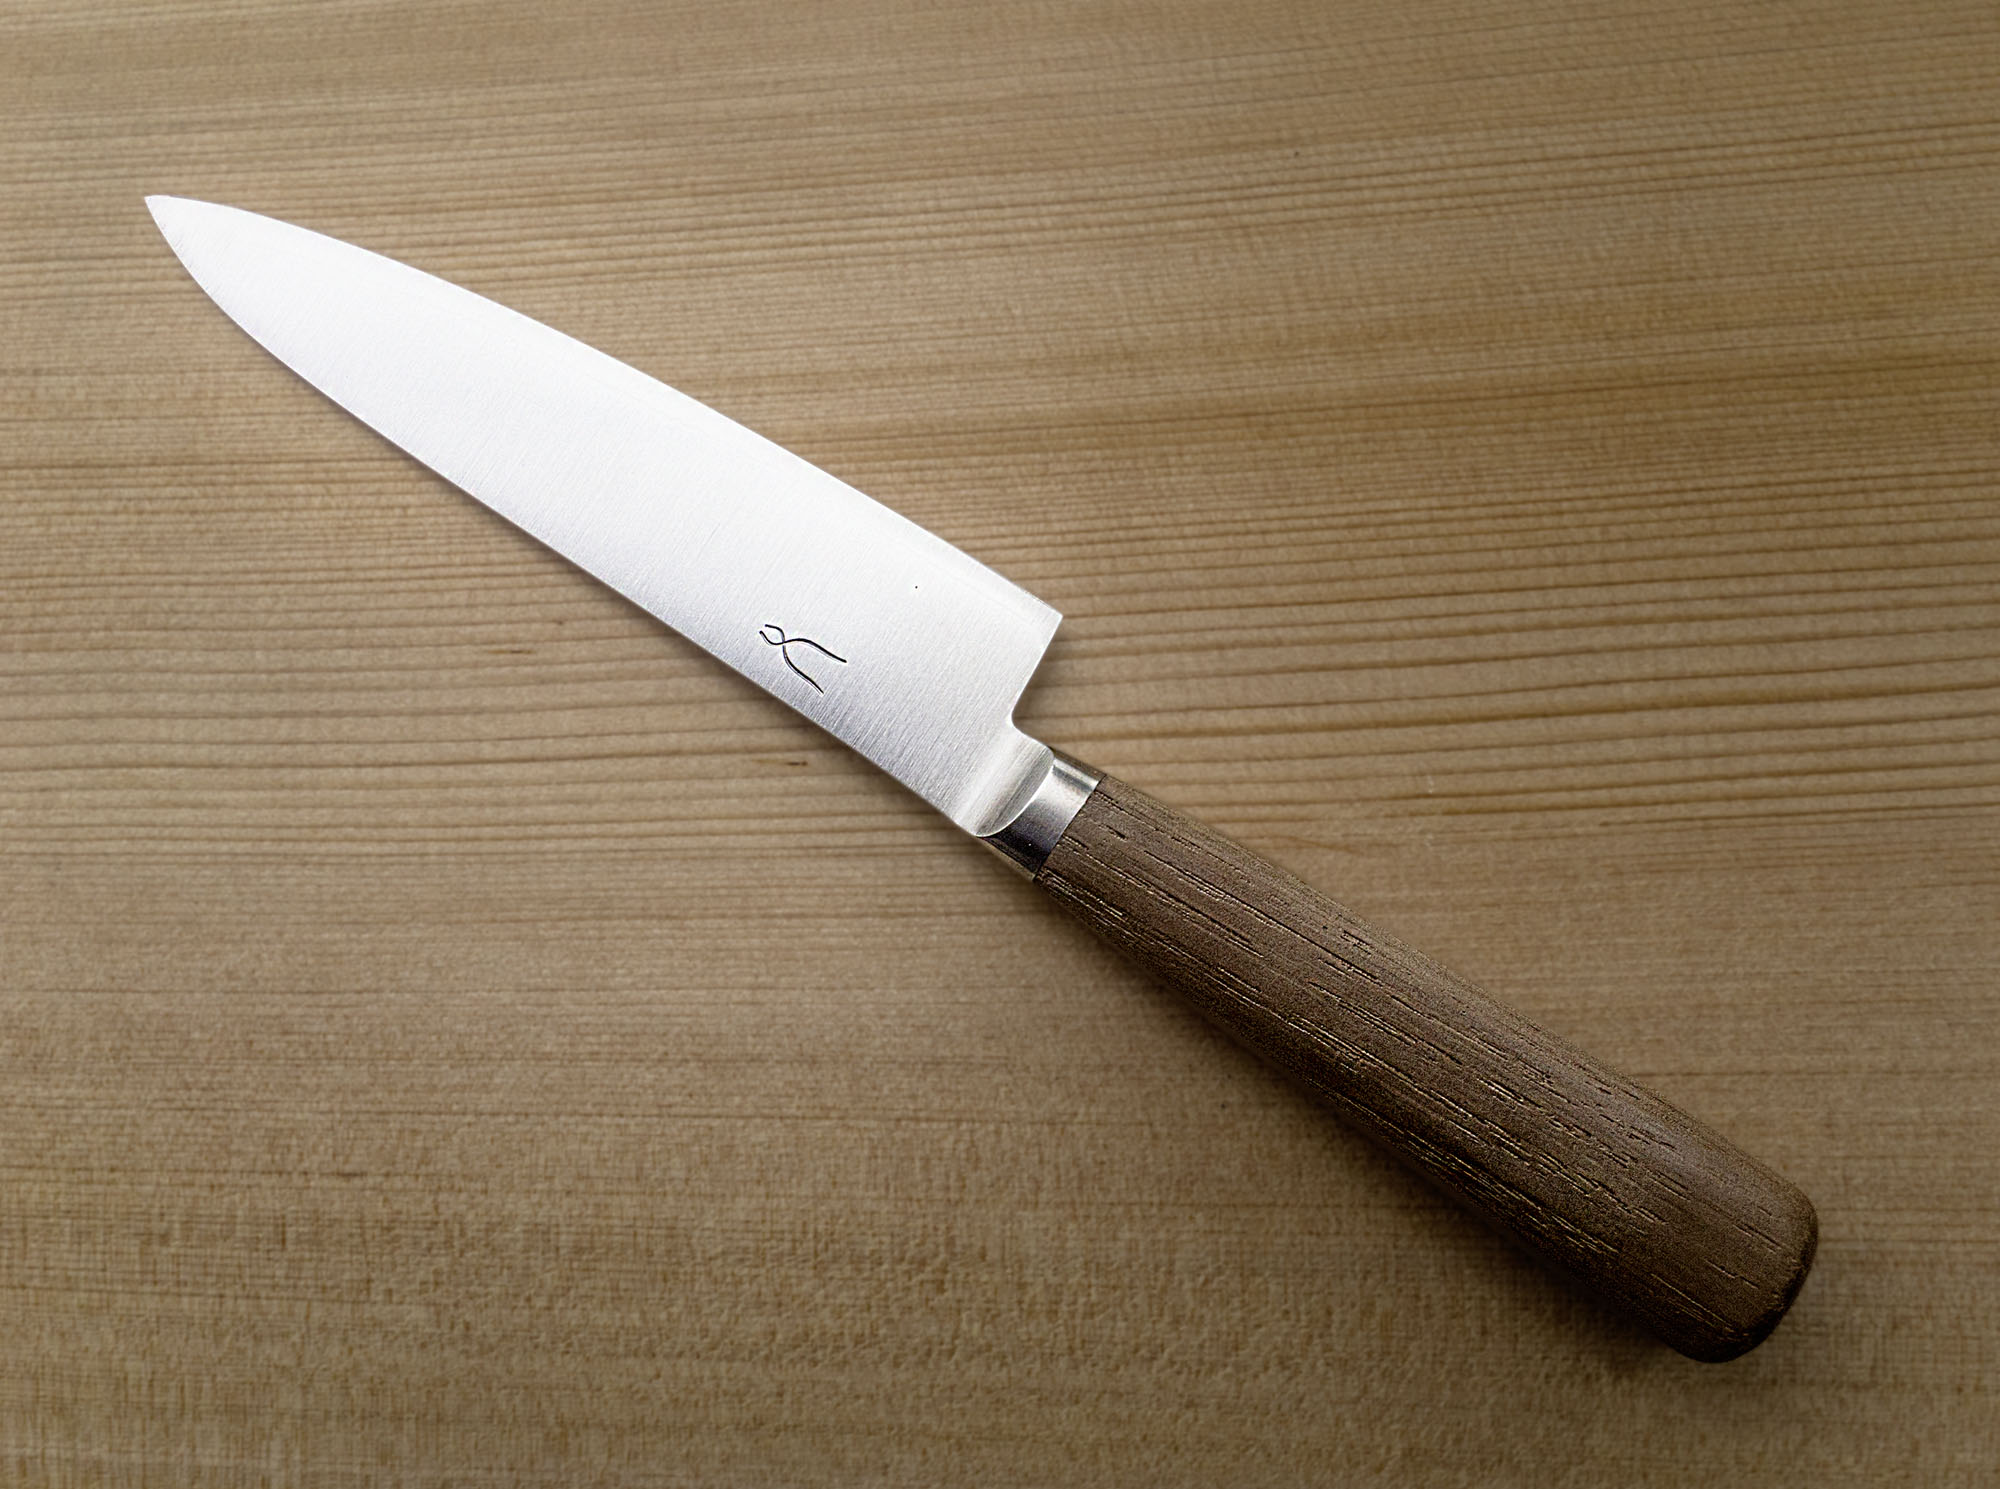 Hone your knowledge of Japanese kitchen knives | The Japan Times